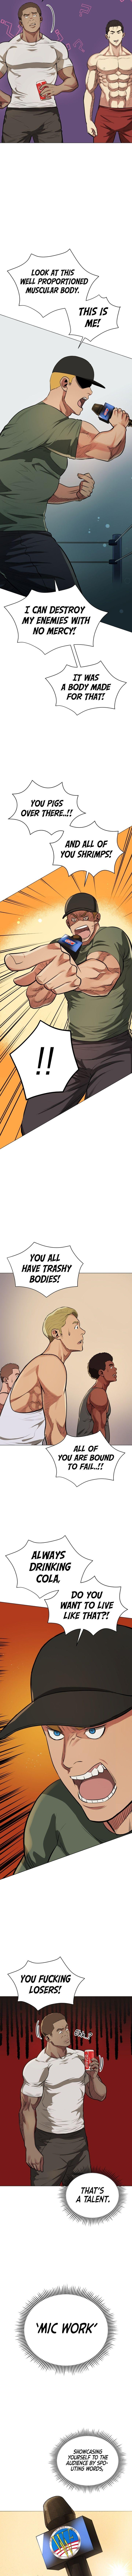 The God of Pro Wrestling - Chapter 6 Page 6